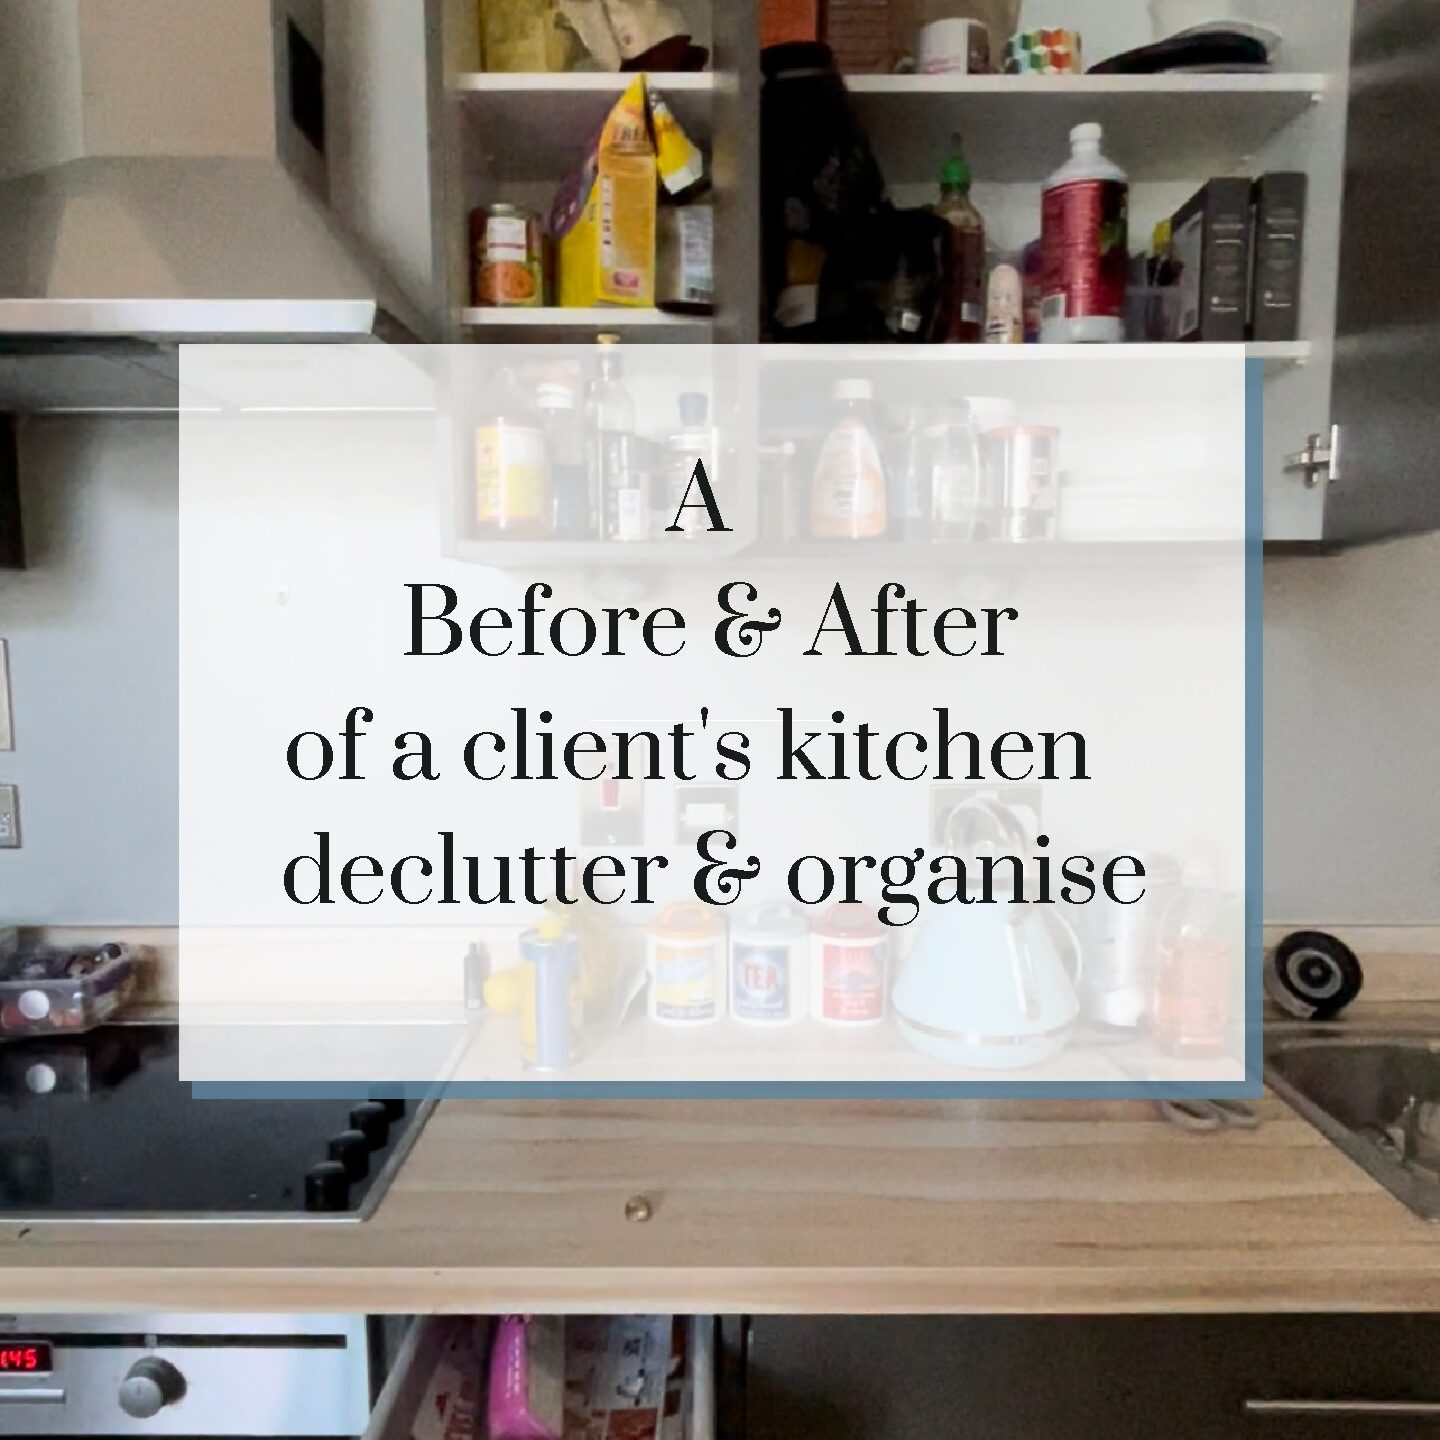 A Before & After of a client’s kitchen declutter & organise